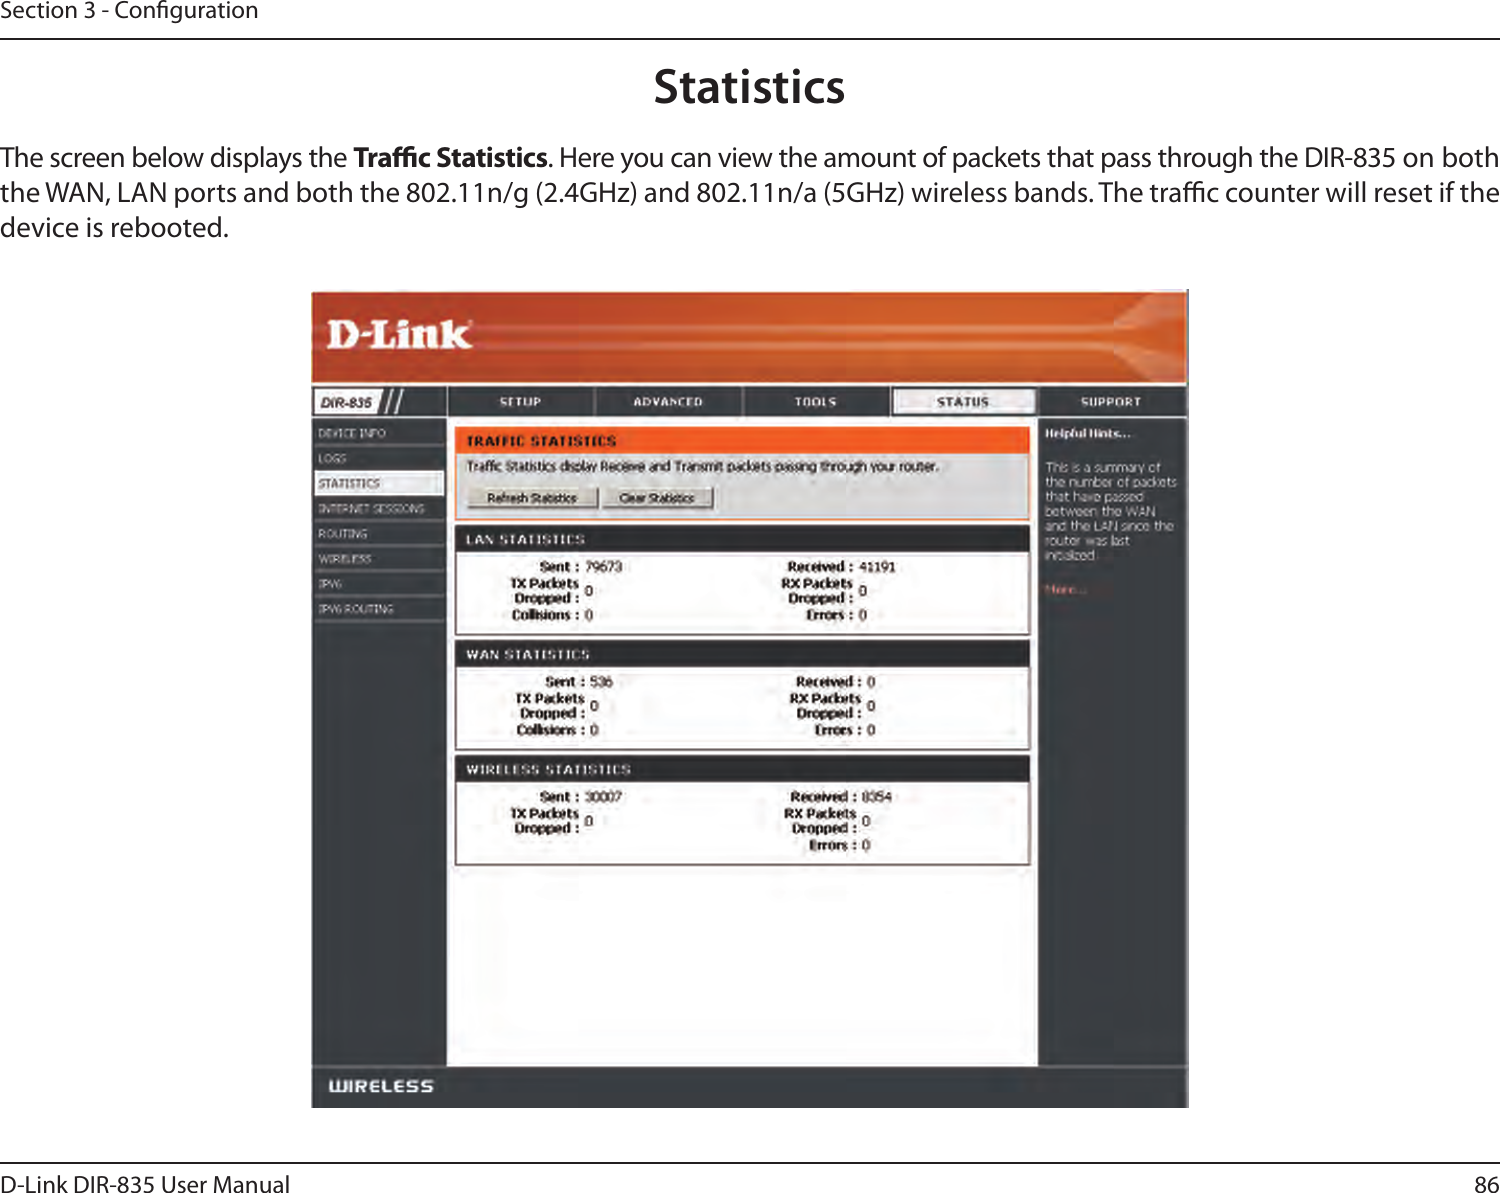 86D-Link DIR-835 User ManualSection 3 - CongurationStatisticsThe screen below displays the Trac Statistics. Here you can view the amount of packets that pass through the DIR-835 on both the WAN, LAN ports and both the 802.11n/g (2.4GHz) and 802.11n/a (5GHz) wireless bands. The trac counter will reset if the device is rebooted.